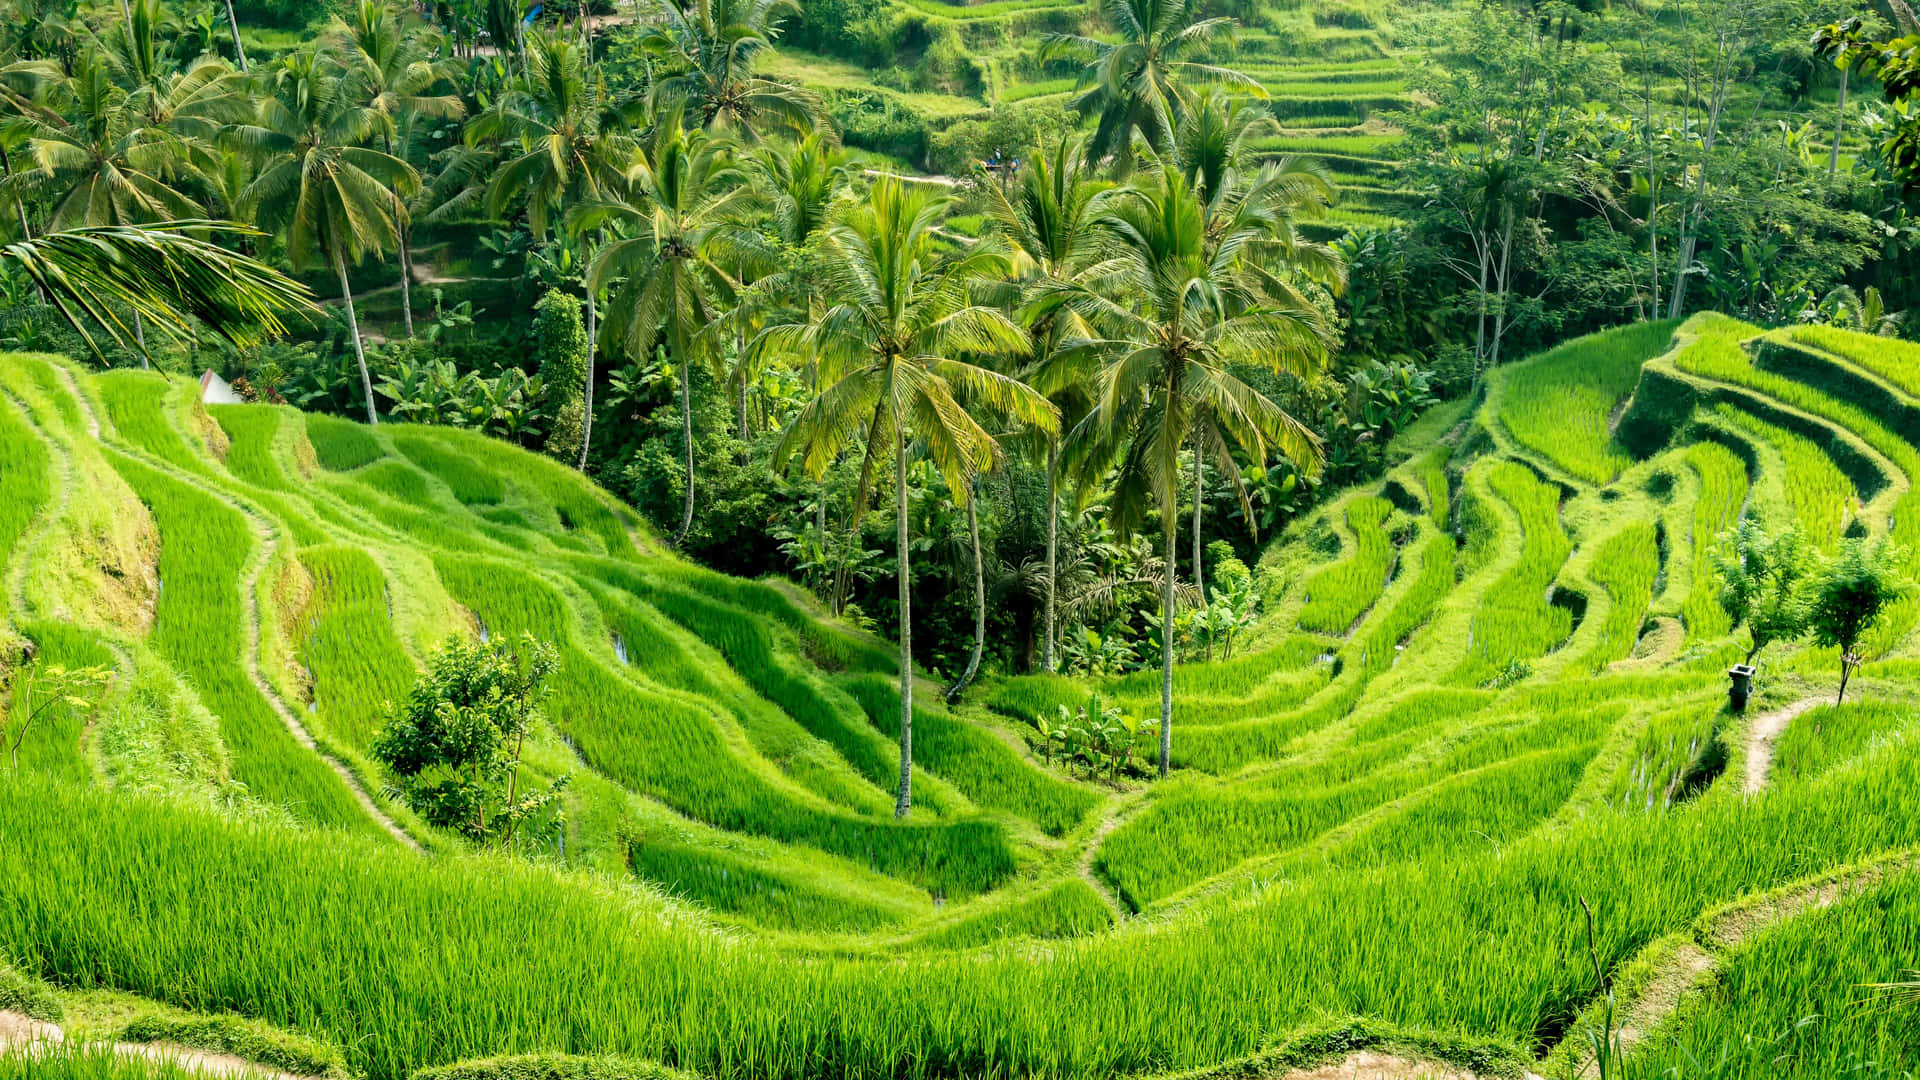 Breathtaking View of Rice Terraces in Bali